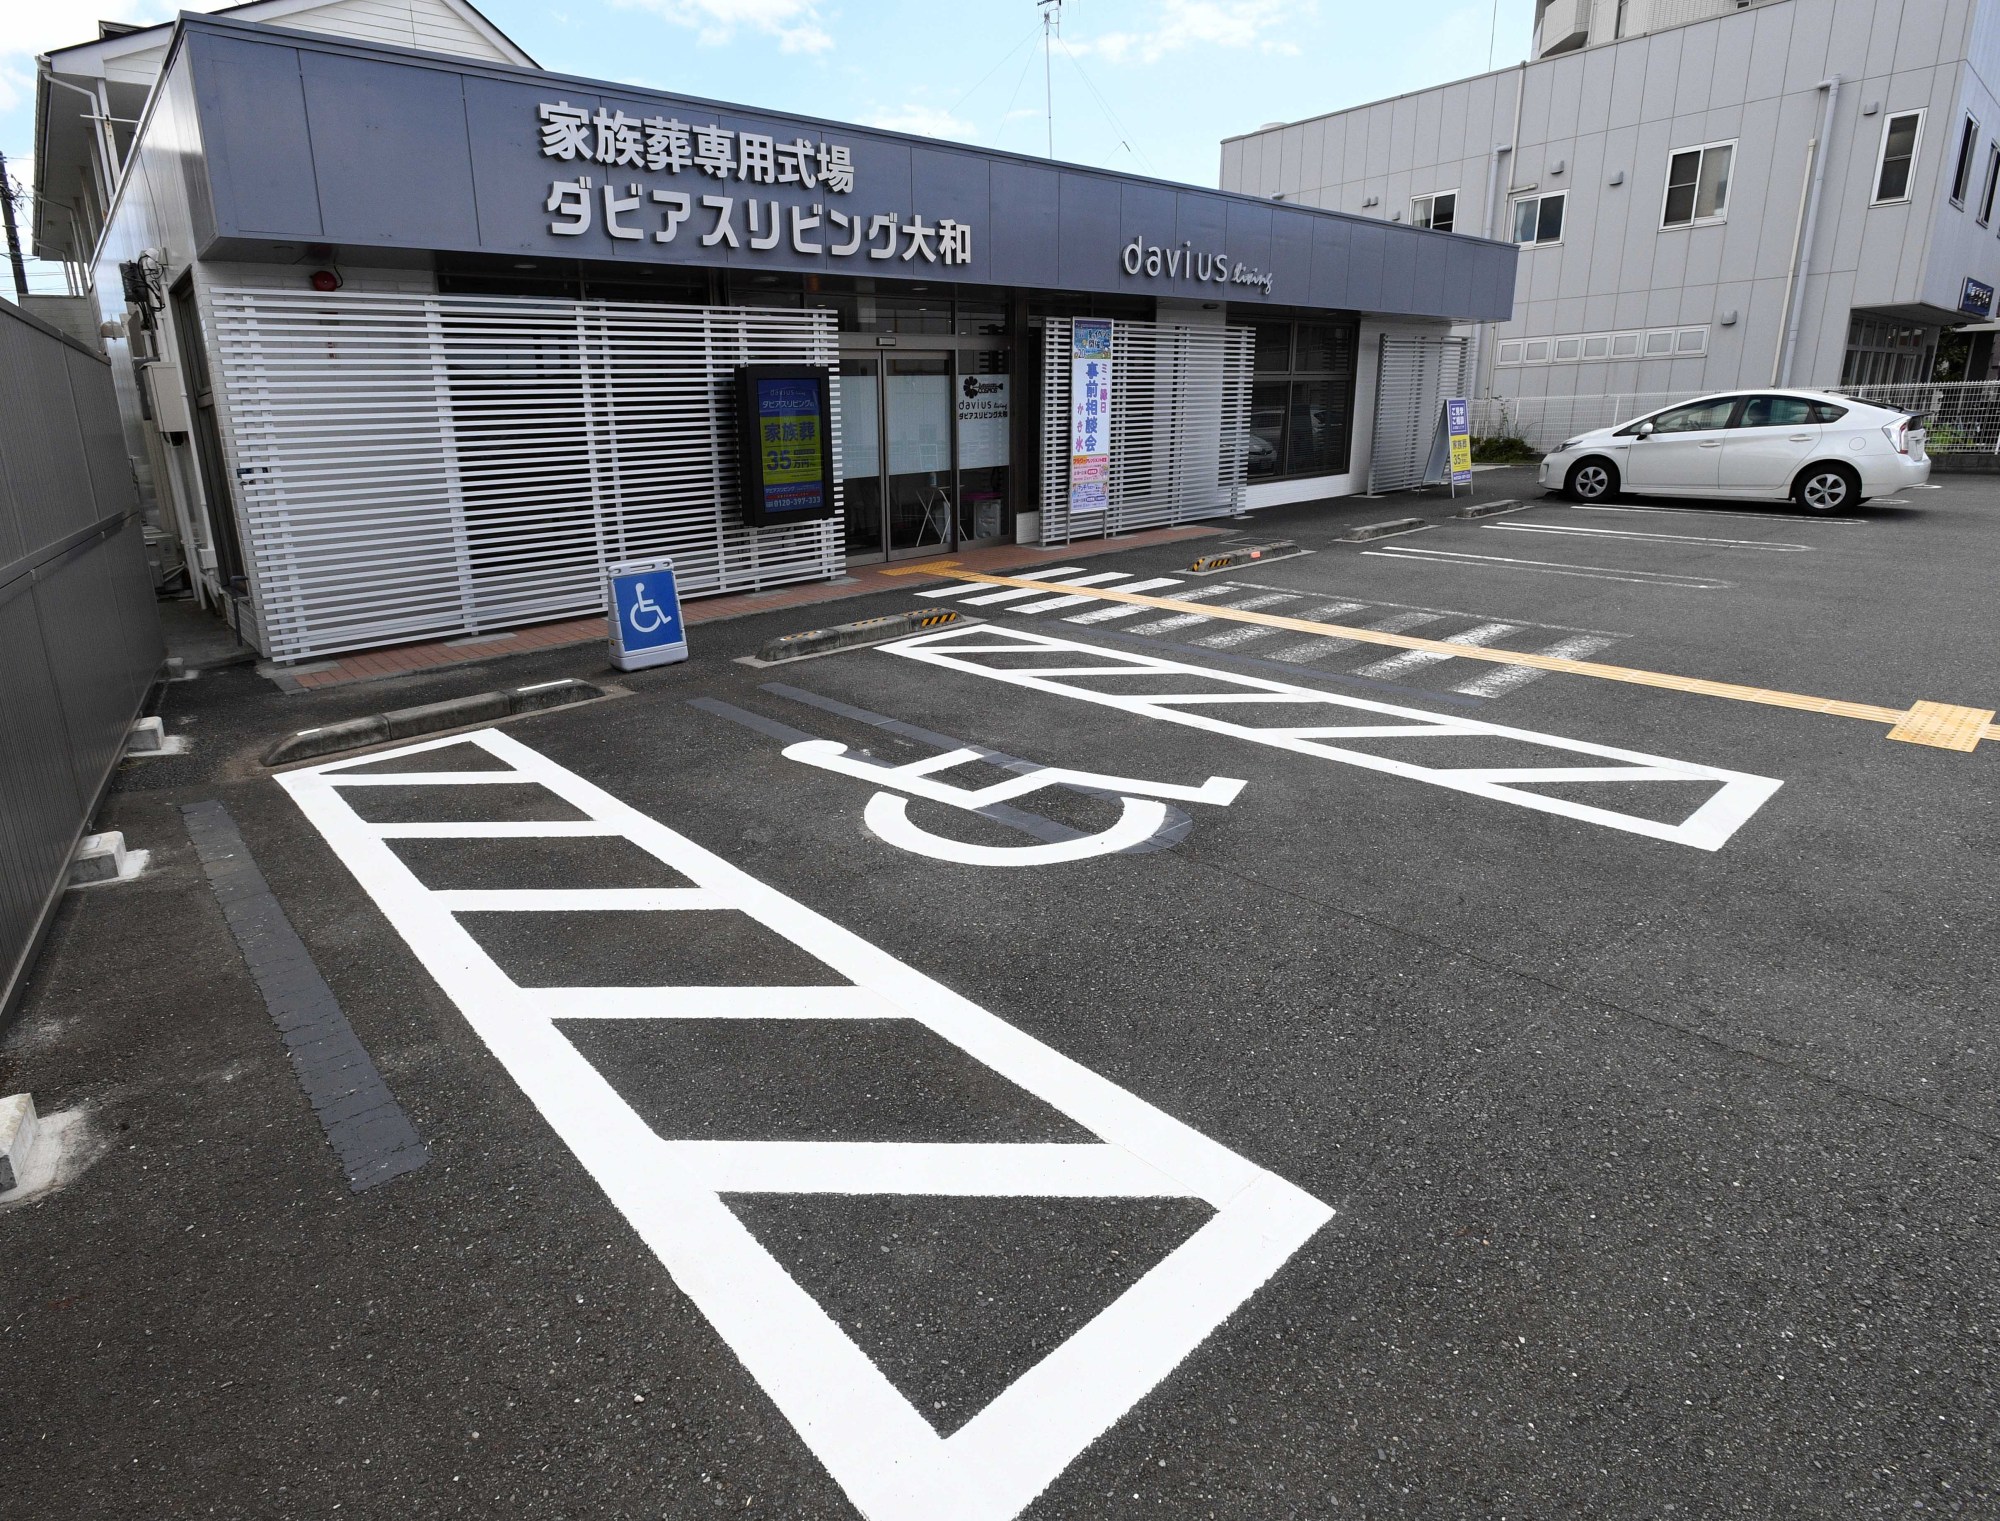 Davius Living Yamato, a funeral parlor in a converted Lawson Inc. store in Yamato, Kanagawa Prefecture, is helping to meet growing demand for modest funerals. It accommodates only 20 to 30 mourners, a far cry from the grand send-offs that used to be expected. | YOSHIAKI MIURA